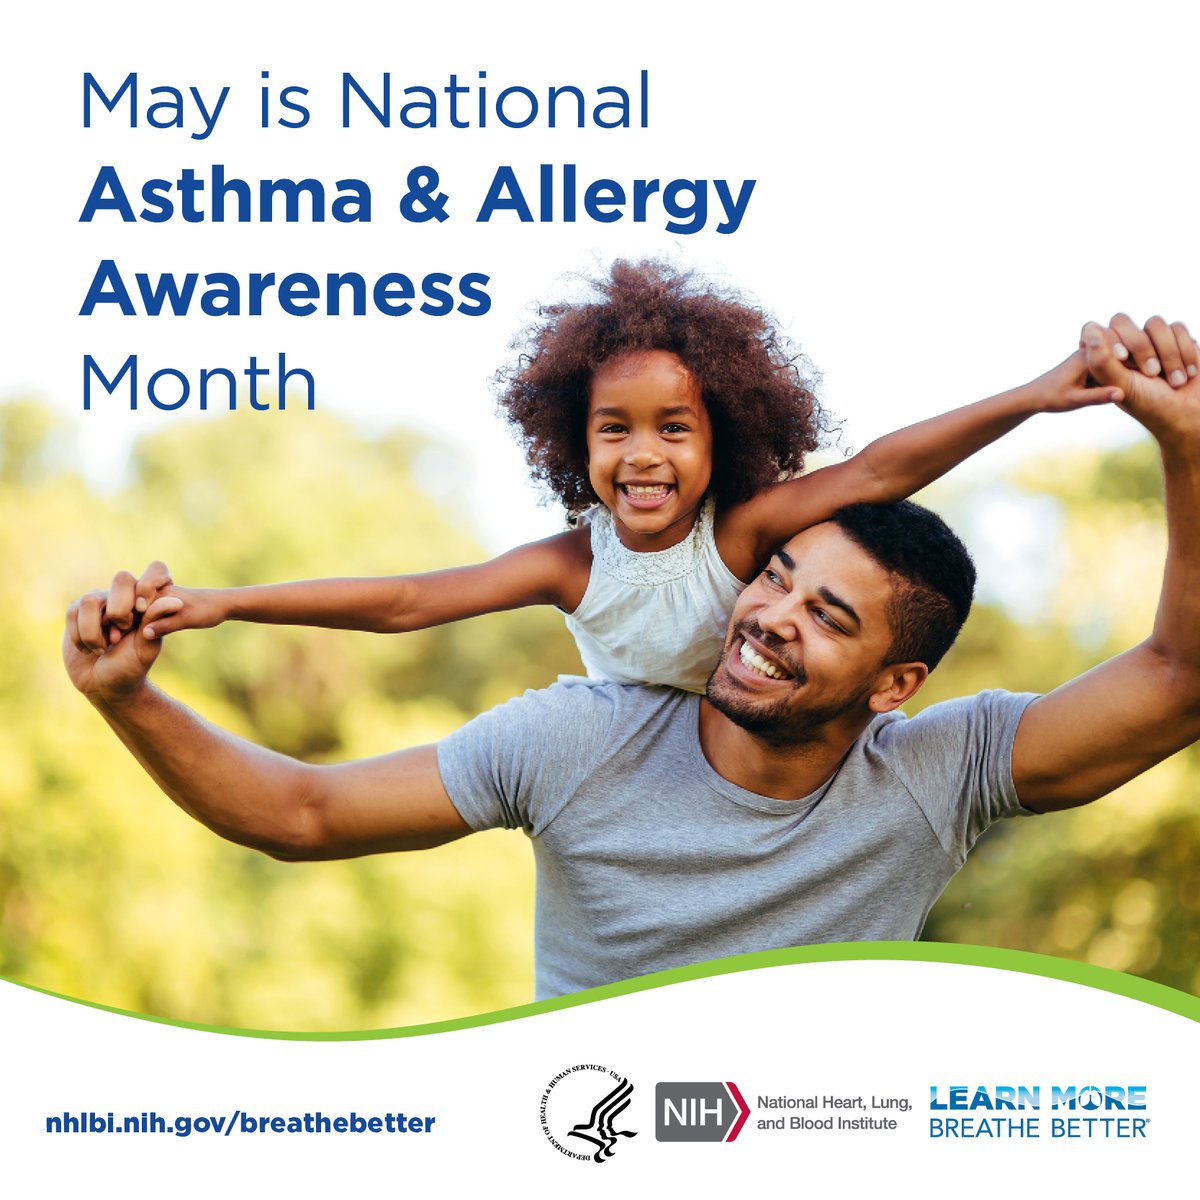 Healthcare providers: Did you know cannabis production workers are exposed to respiratory hazards that can cause or worsen asthma? Learn more about the cannabis industry and work-related asthma: ow.ly/Zf0U50RUcNX #AsthmaAwarenessMonth